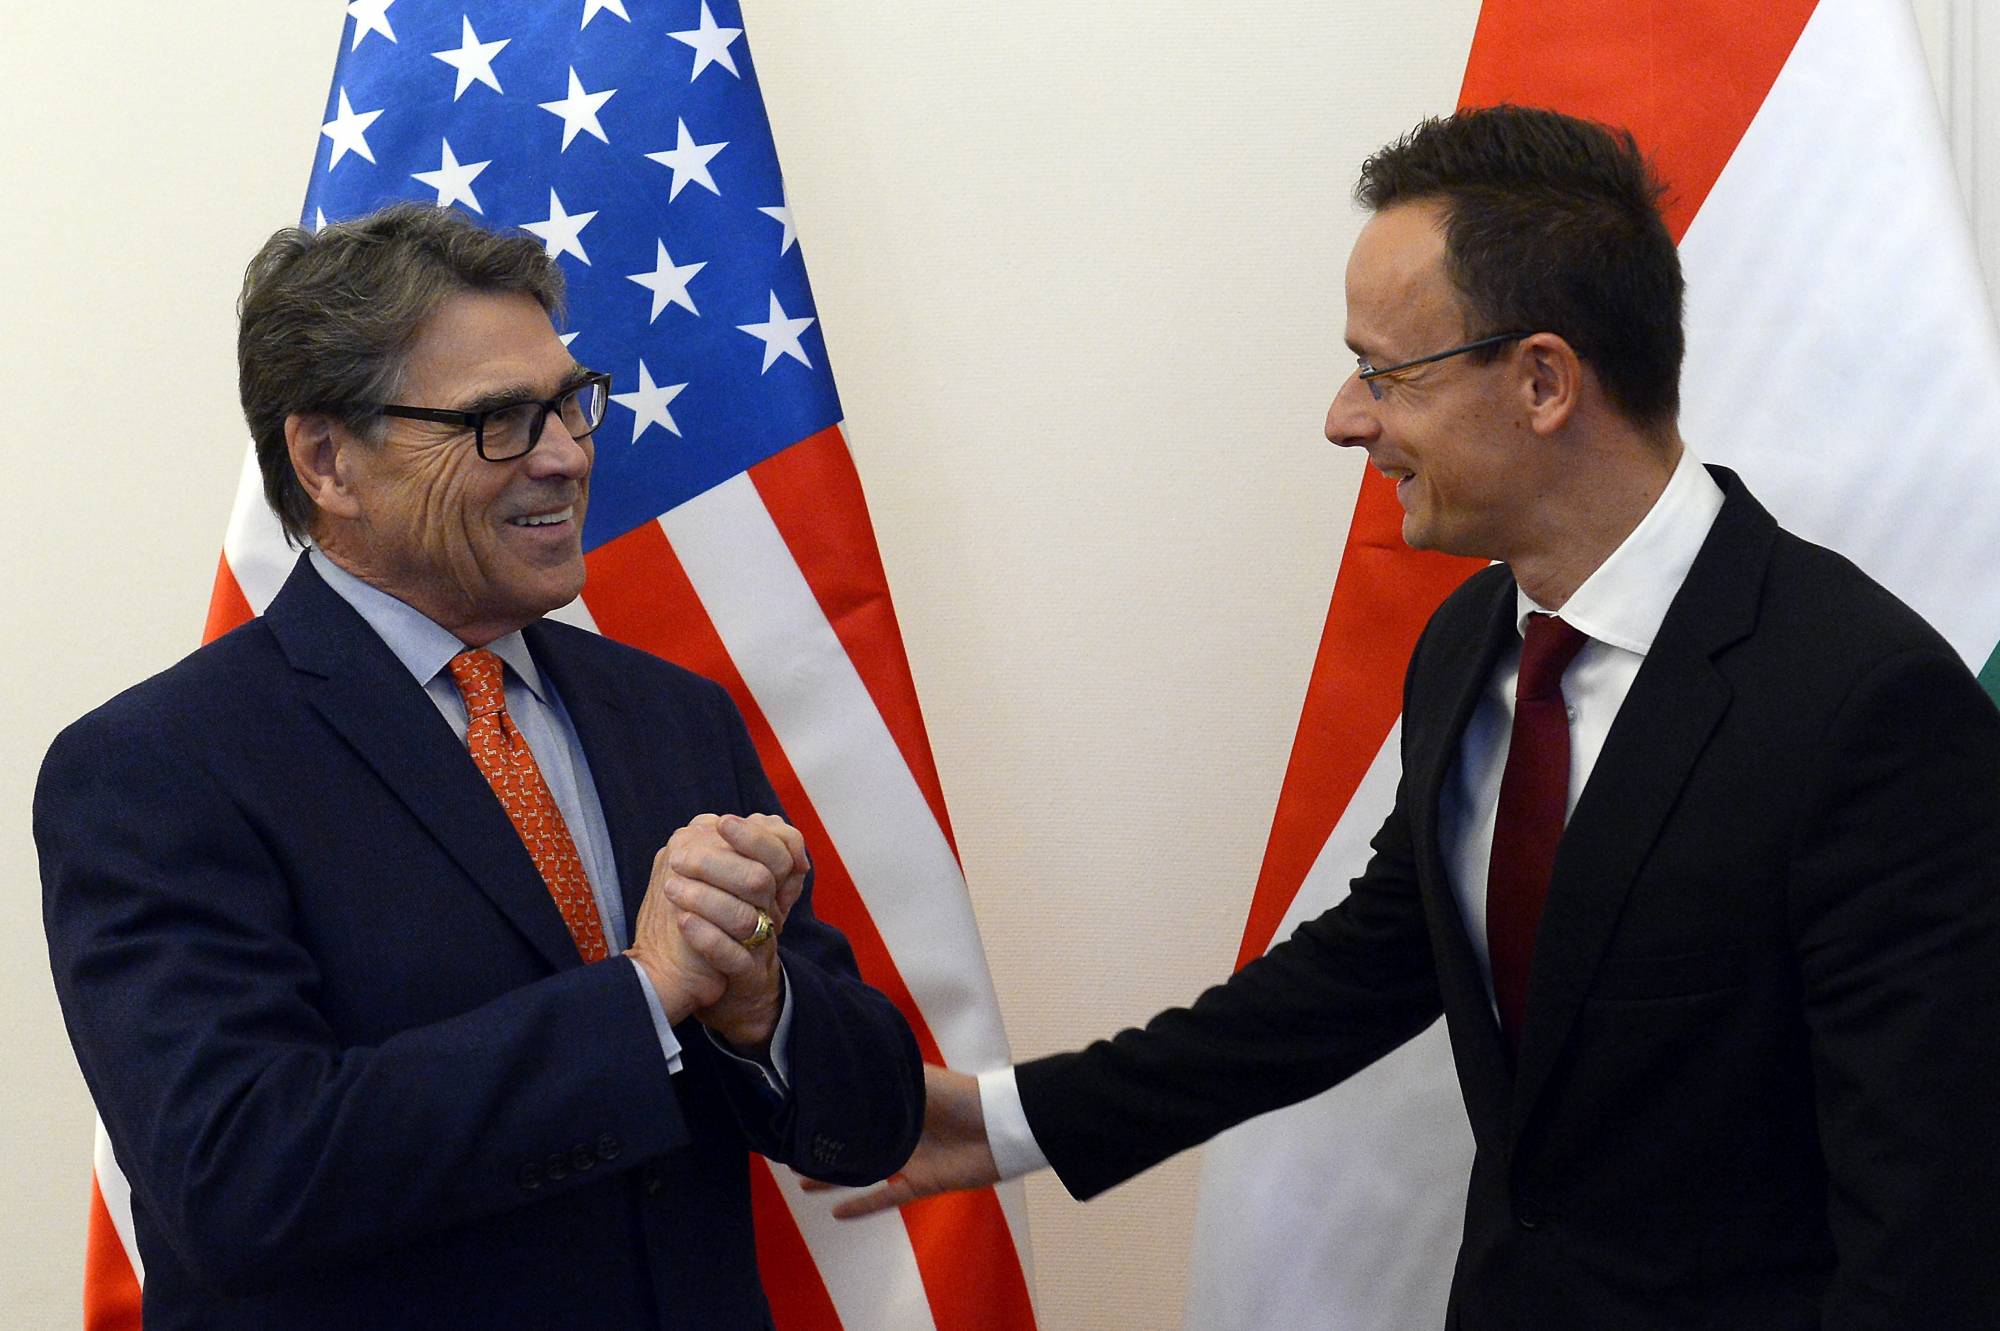 Hungarian Minister of Foreign Affairs and Trade Peter Szijjarto, right, welcomes US Secretary of Energy Rick Perry at the Ministry of Foreign Affairs and Trade in Budapest, Hungary, Tuesday, Nov. 13, 2018. (Lajos Soos/MTI via AP)